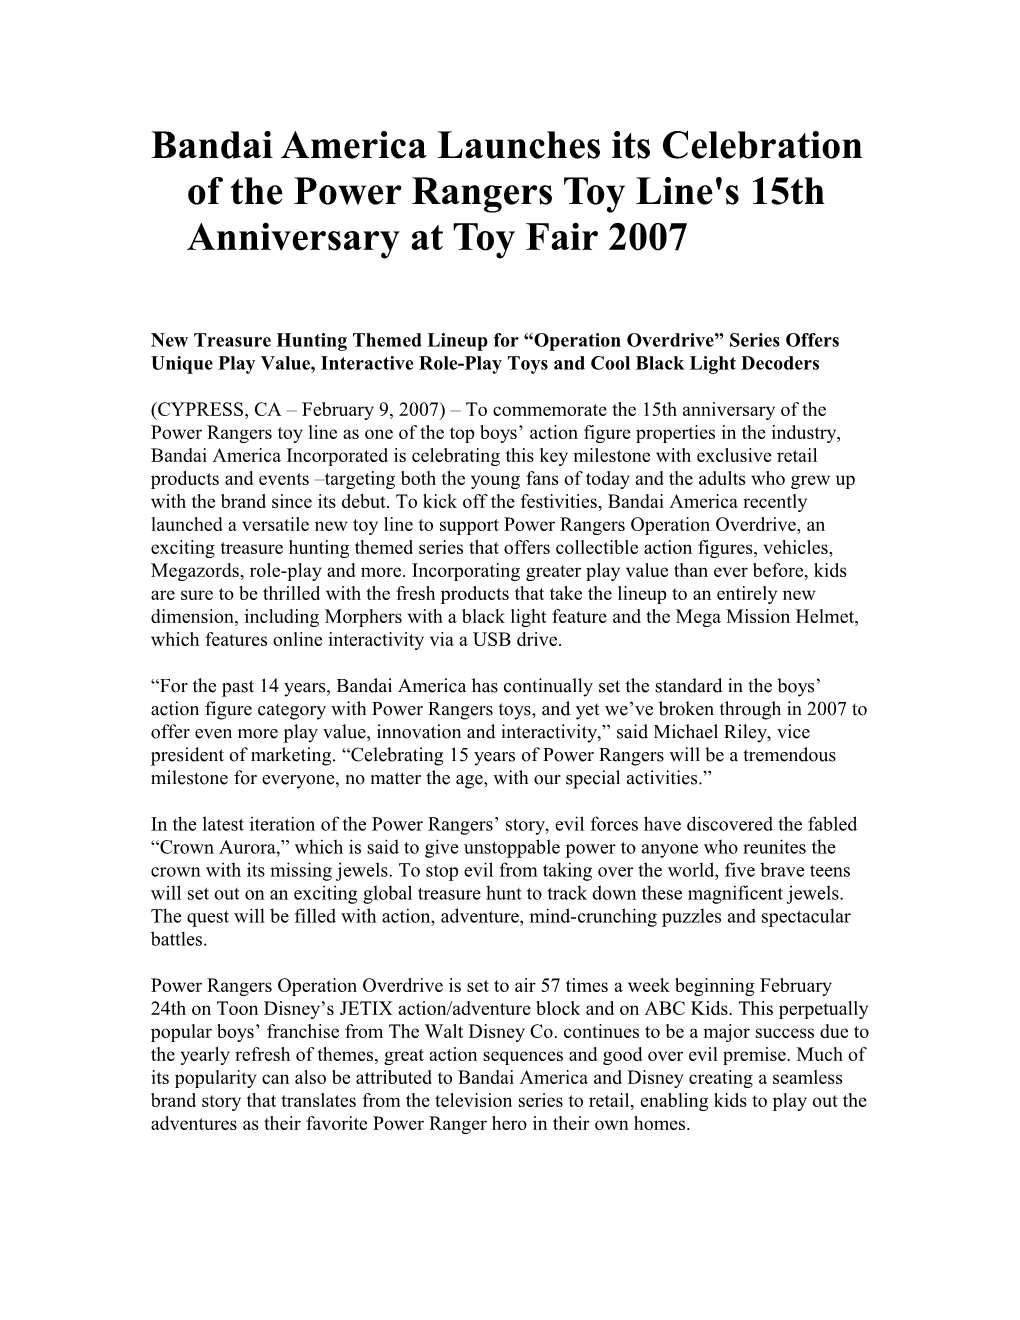 Bandai America Launches Its Celebration of the Power Rangers Toy Line's 15Th Anniversary